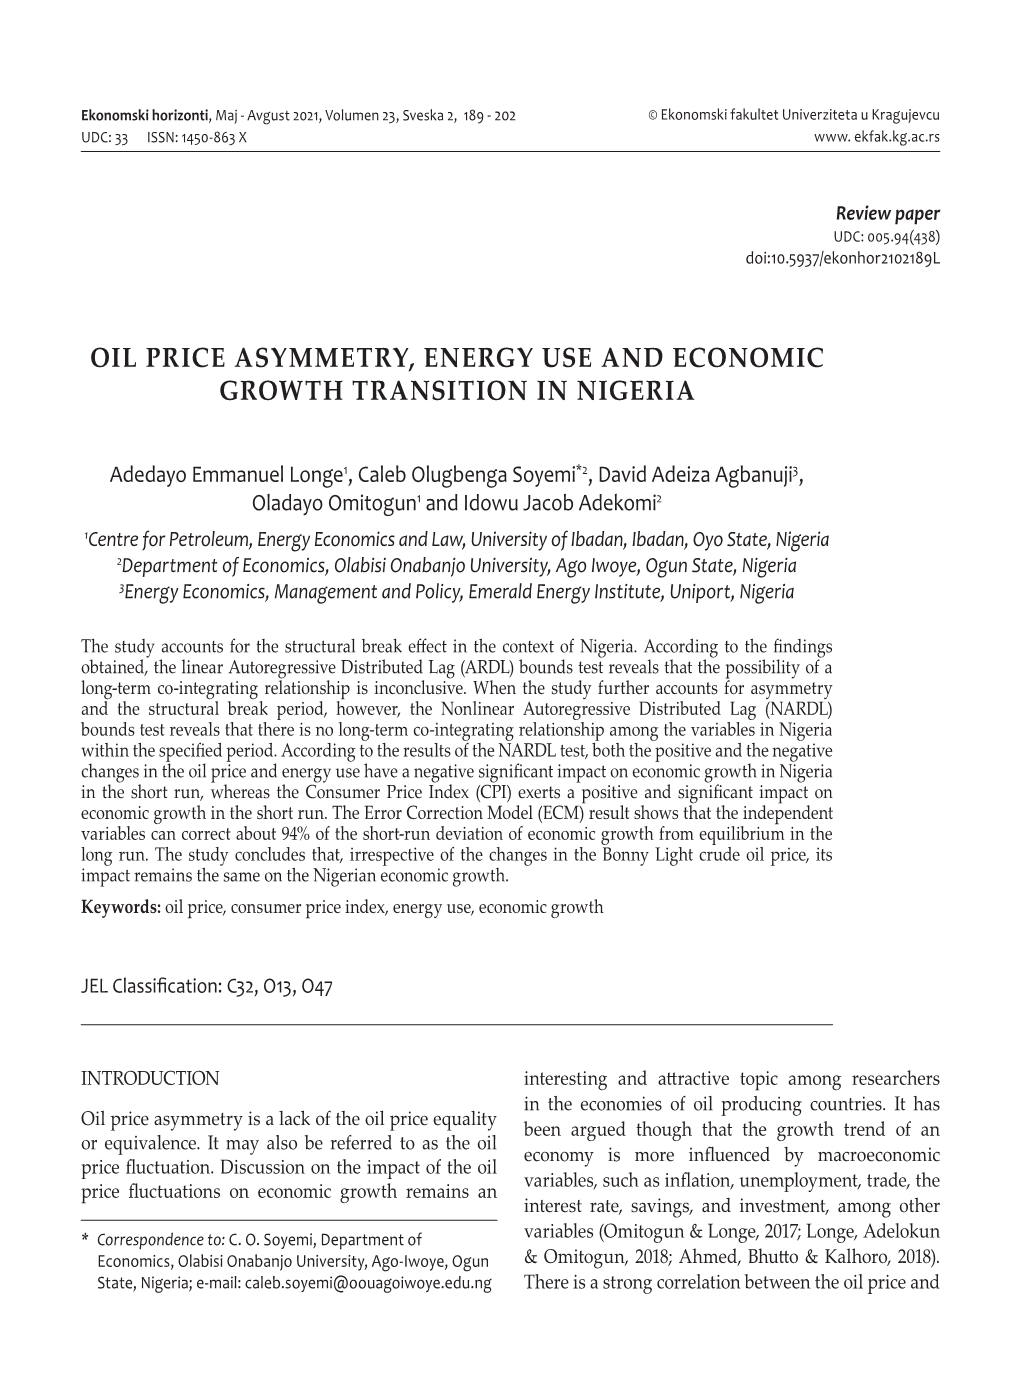 Oil Price Asymmetry, Energy Use and Economic Growth Transition in Nigeria